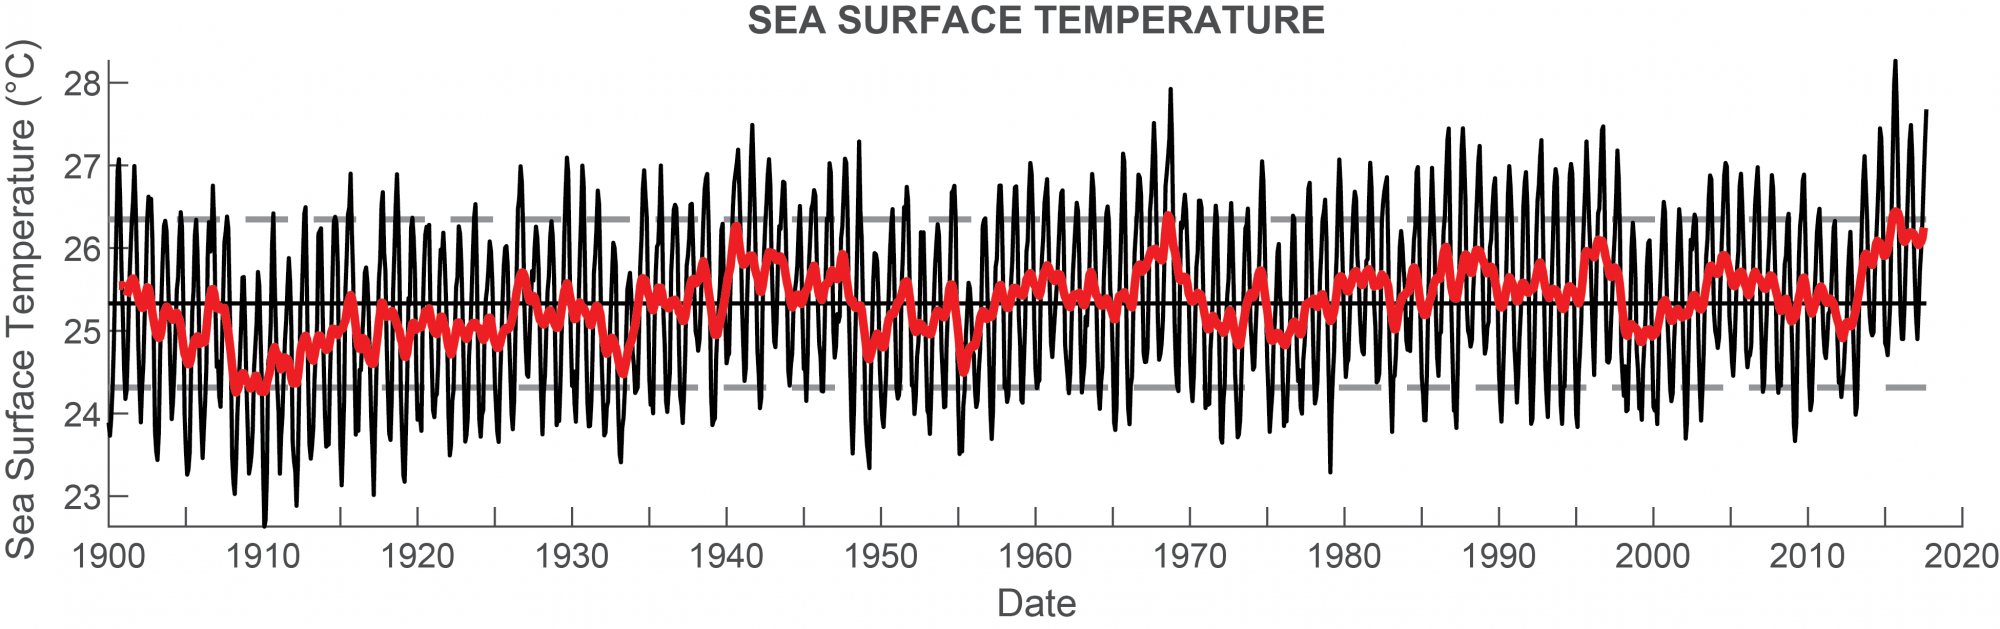 Sea Surface temperature in West Hawaii over time